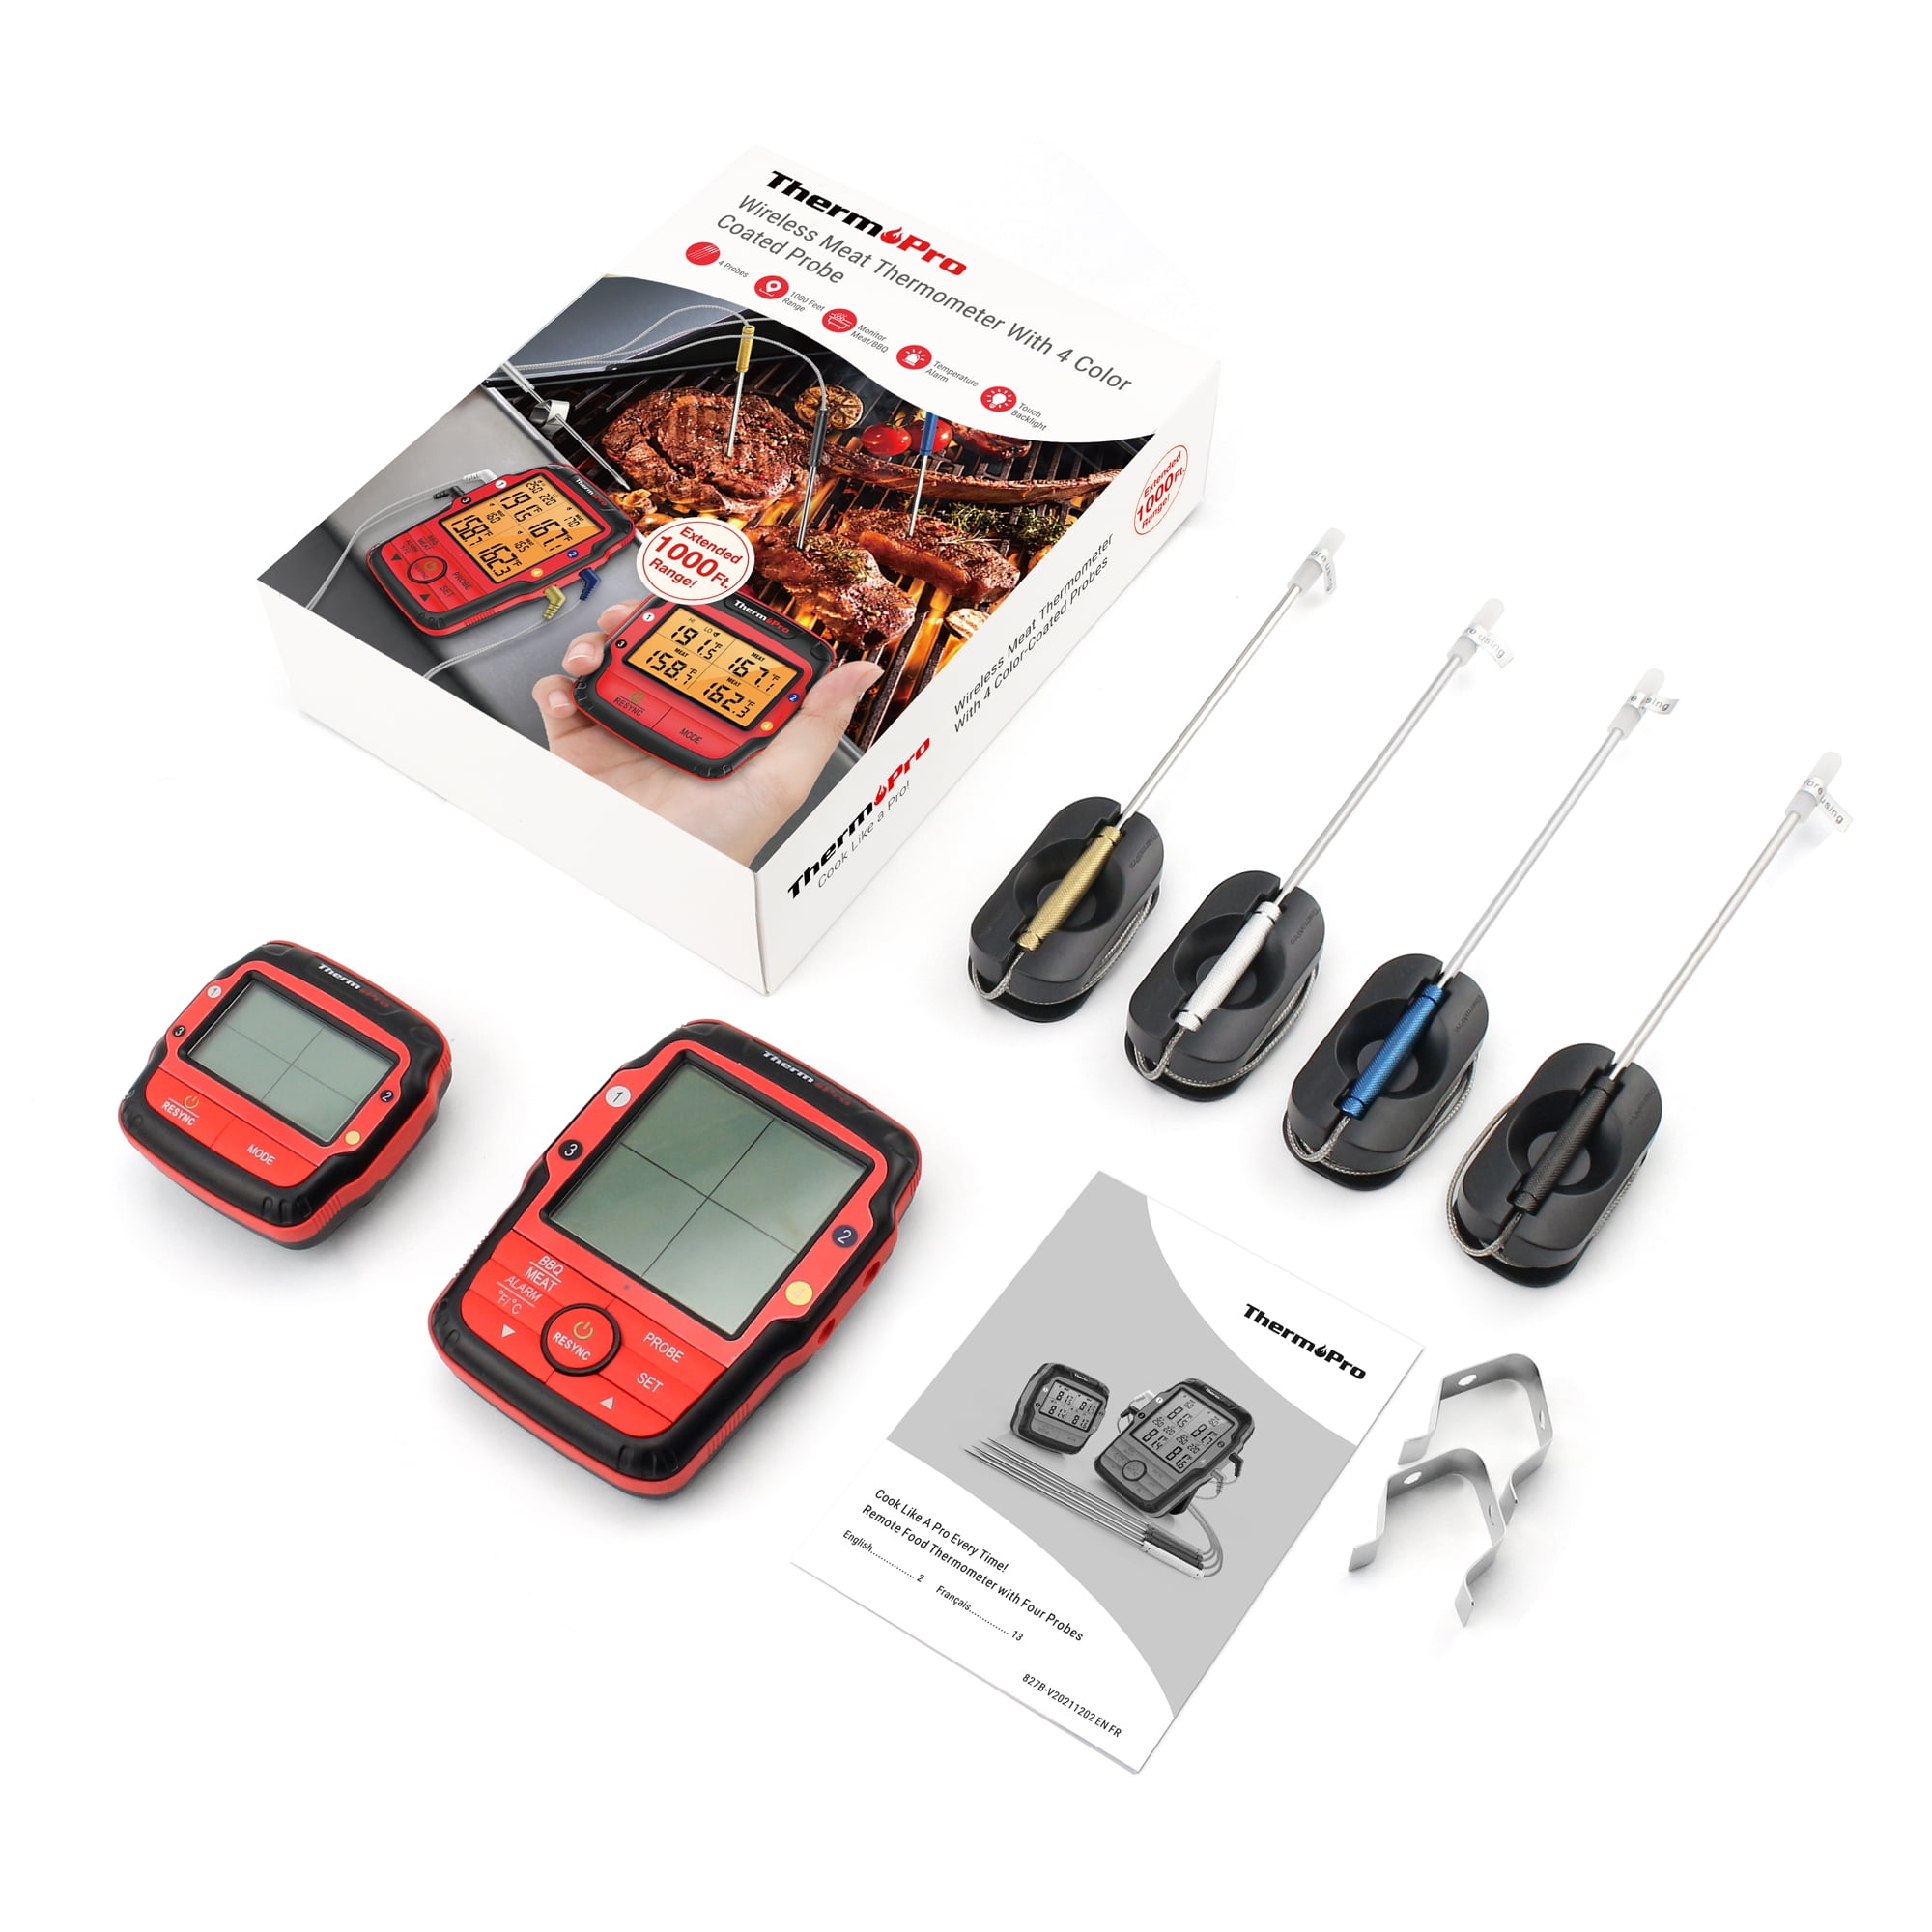 ThermoPro TP826 500FT Wireless Meat Thermometer, Dual Meat Probe Cooking  Thermometer with HI/Low Alert, IPX4 Food Grill Thermometer, Outdoor Fryer